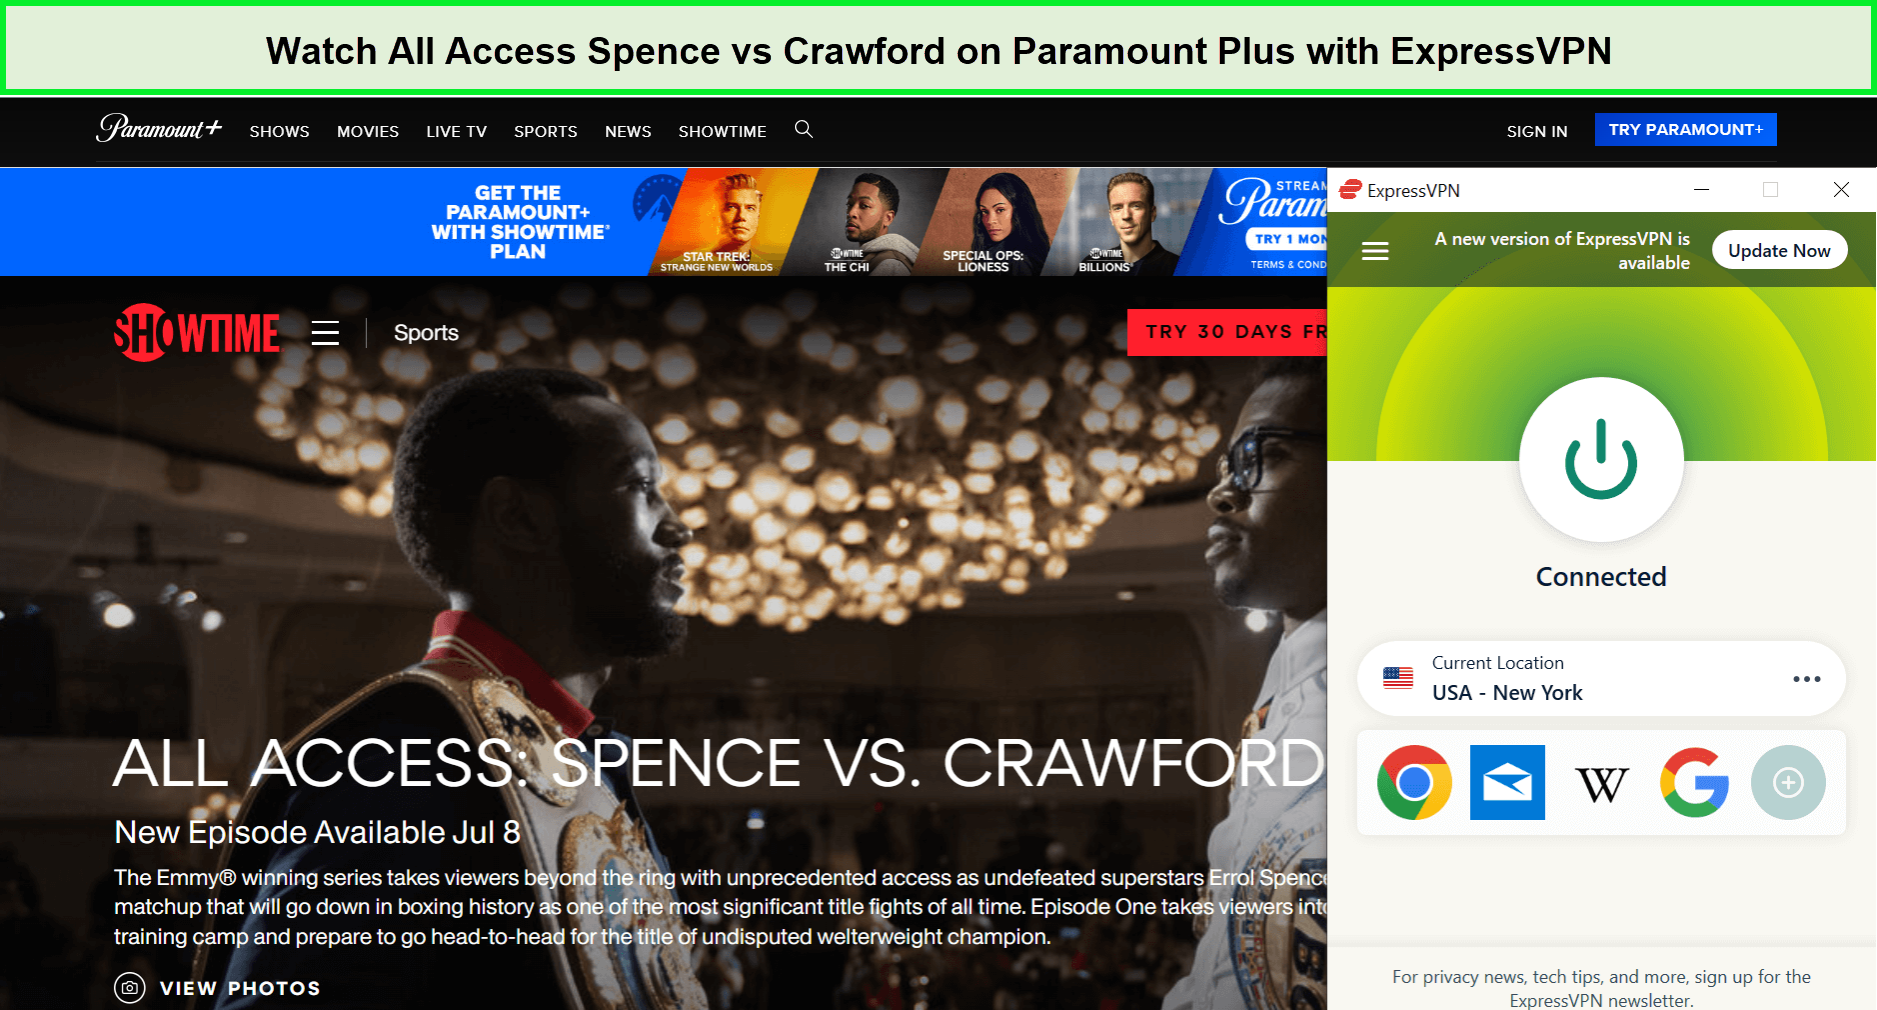 Watch-All-Access-Spence-vs-Crawford-outside-USA-on-Paramount-Plus-with-ExpressVPN